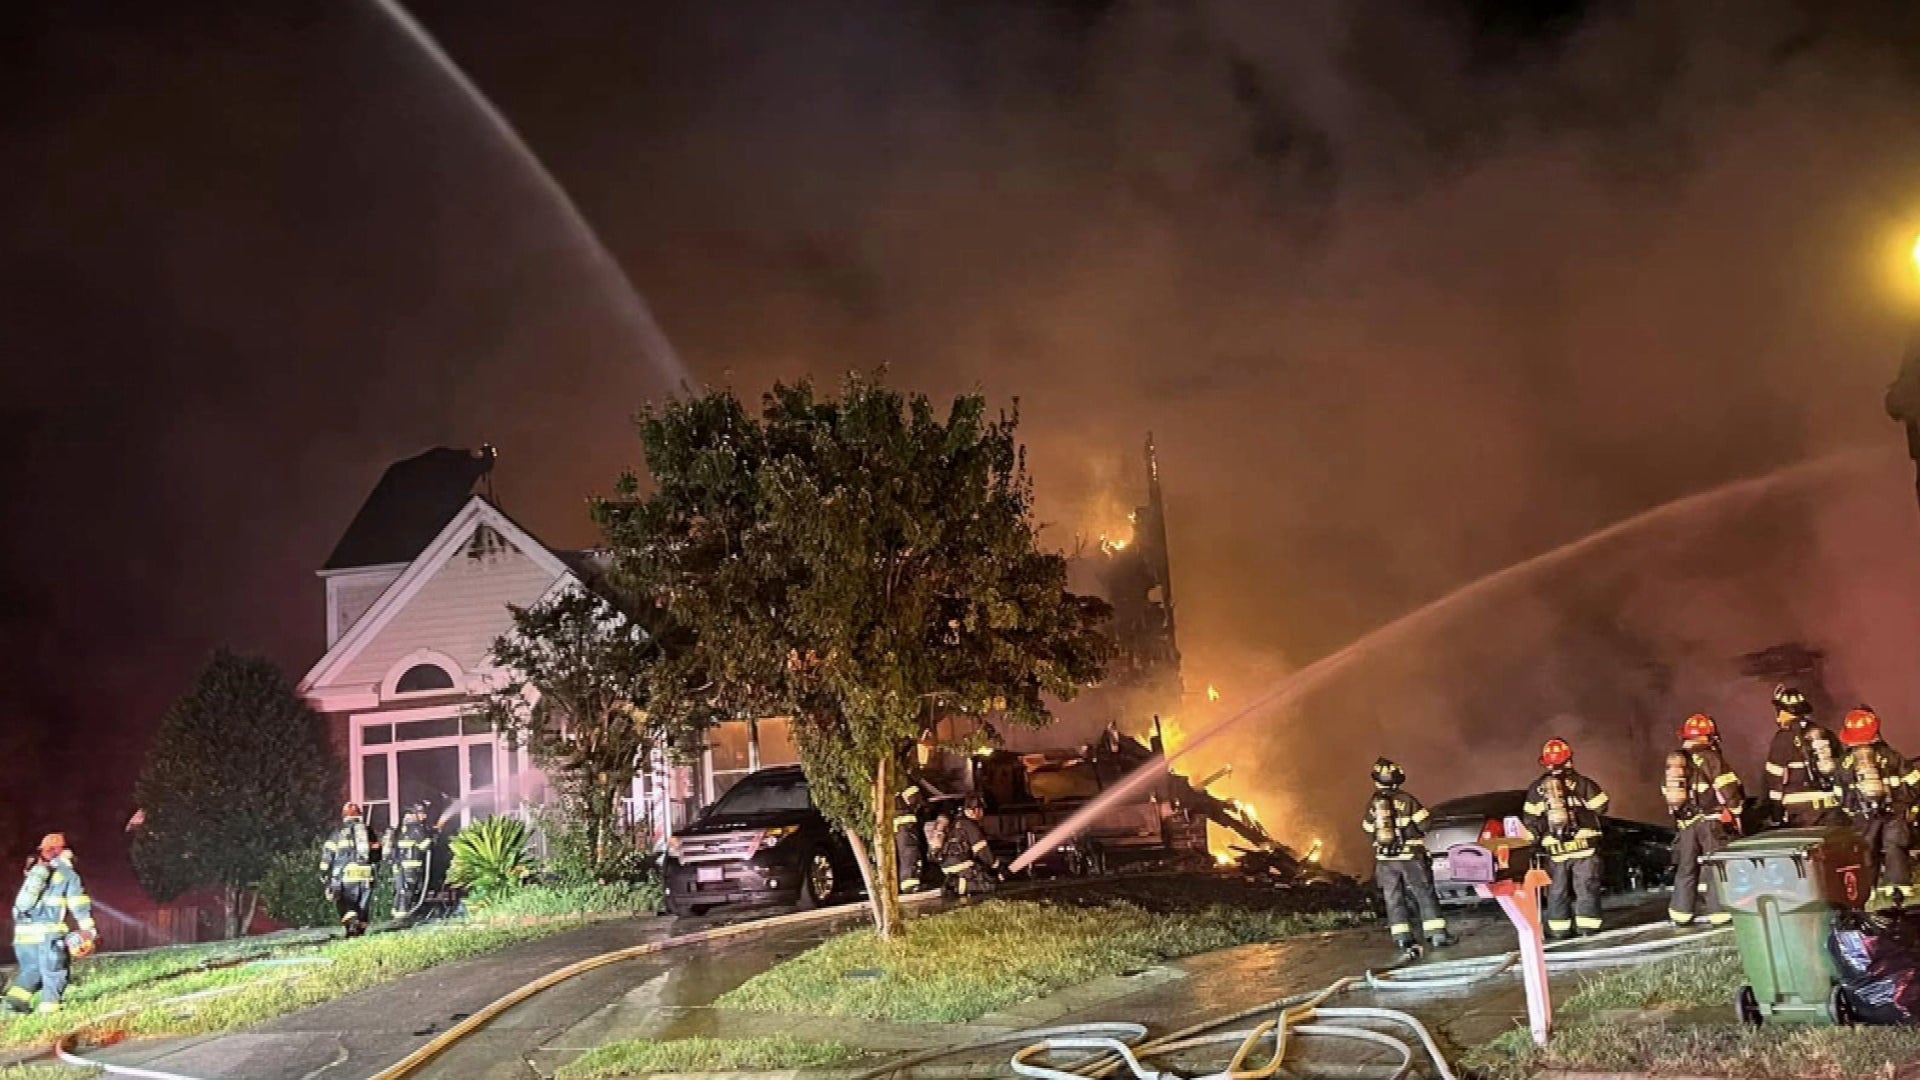 12-Year-Old Up Late Playing Video Games Saves Family From Fire 12-Year-Old Up Late Playing Video Games Saves Family From Fire 